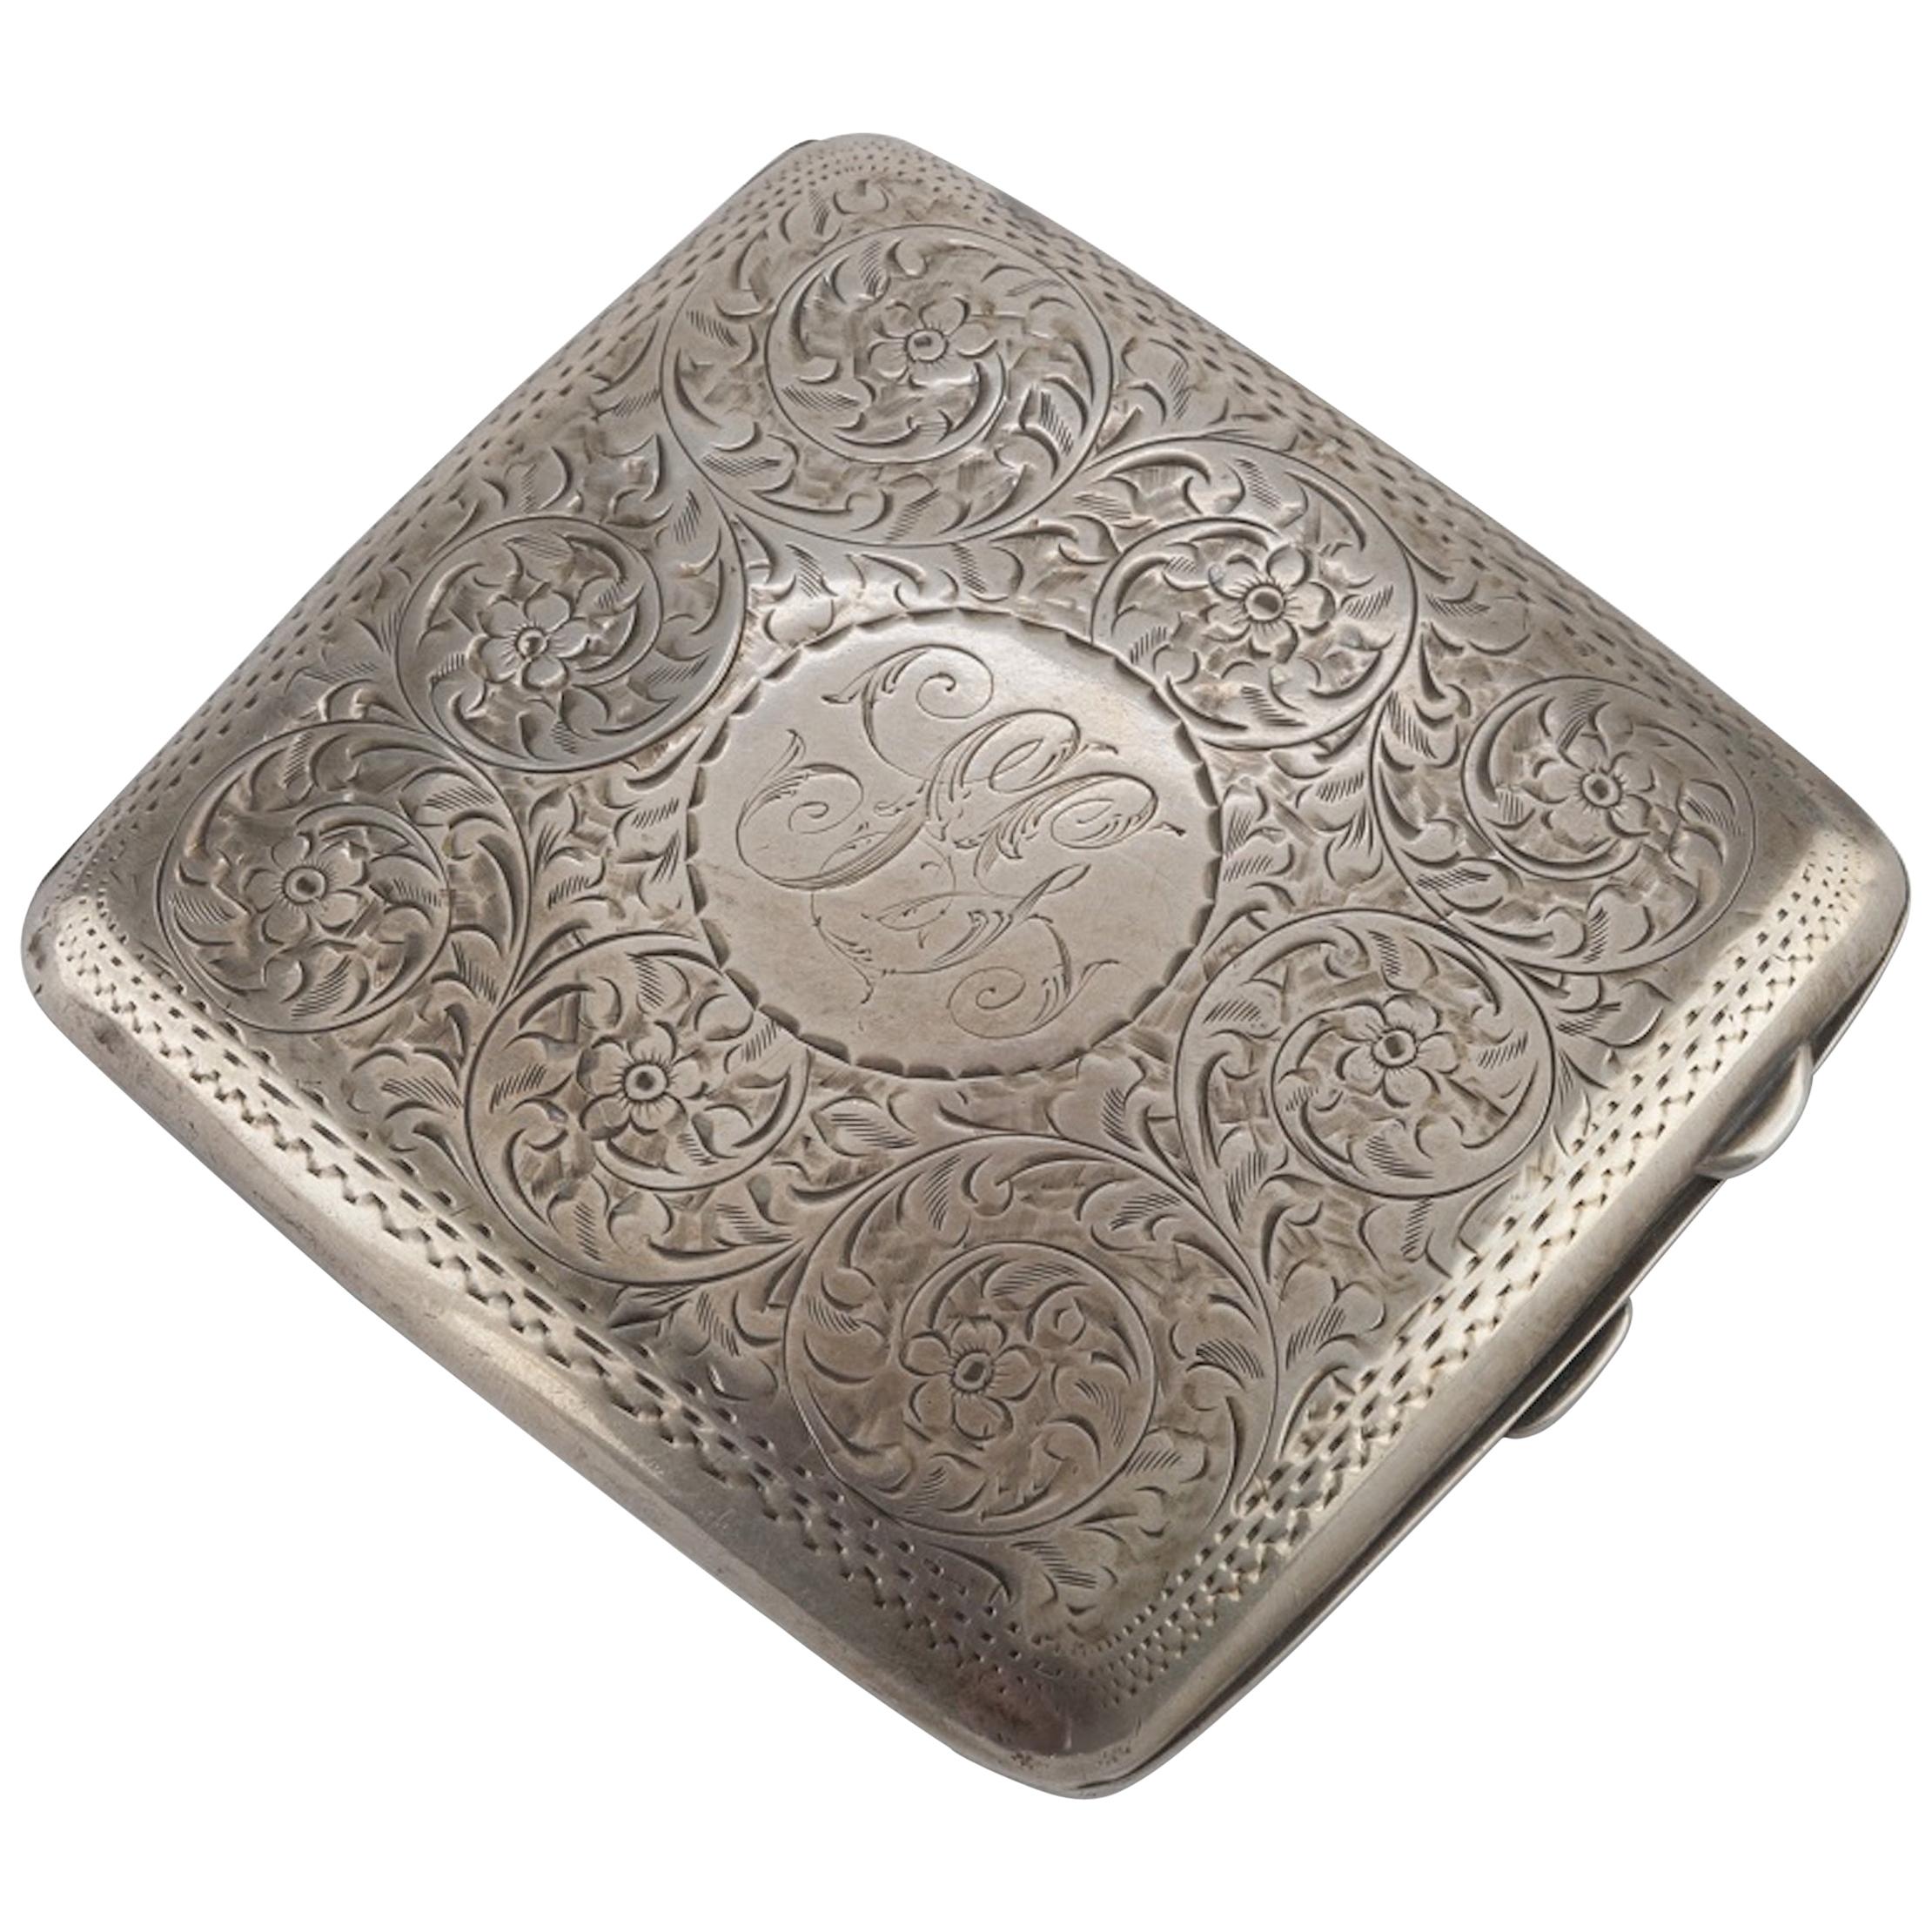 Vintage Silver Cigarette Case, Manufactured in England by Joseph Gloster Ltd.